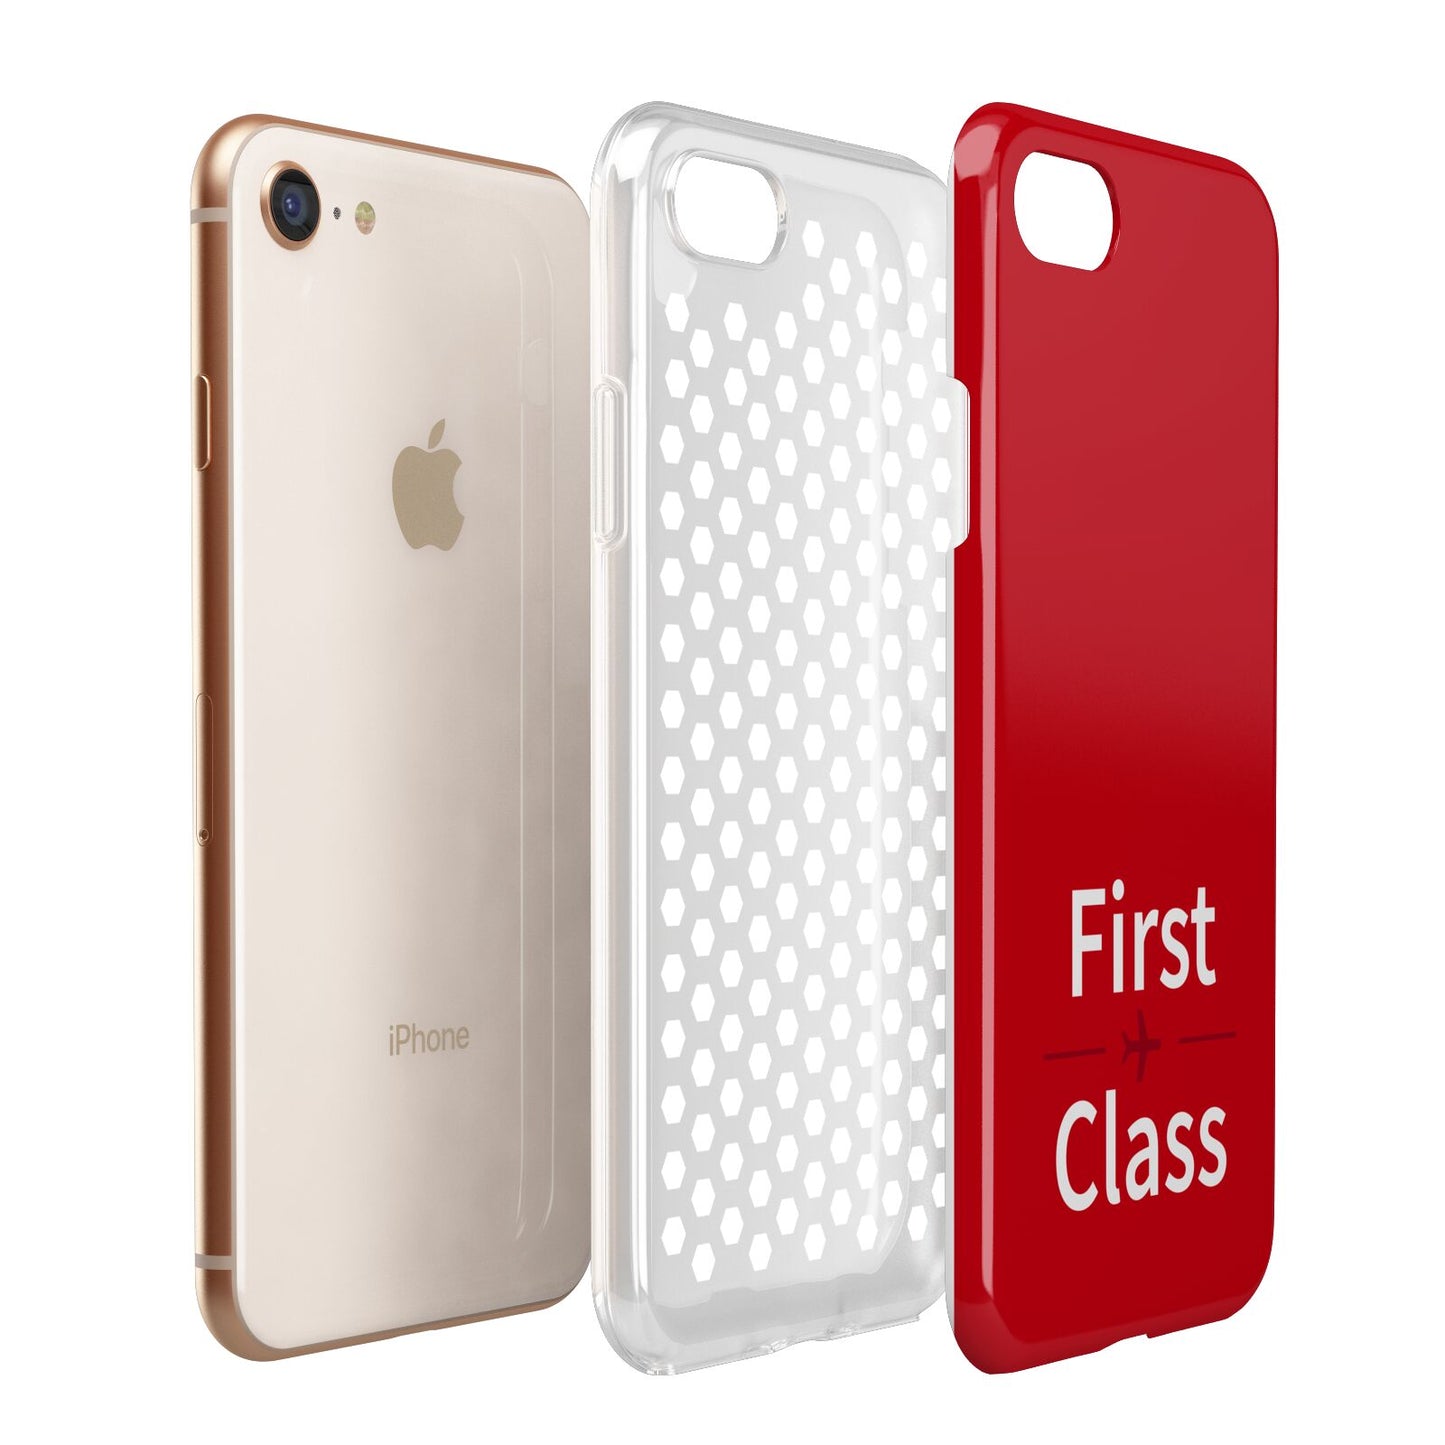 First Class Apple iPhone 7 8 3D Tough Case Expanded View